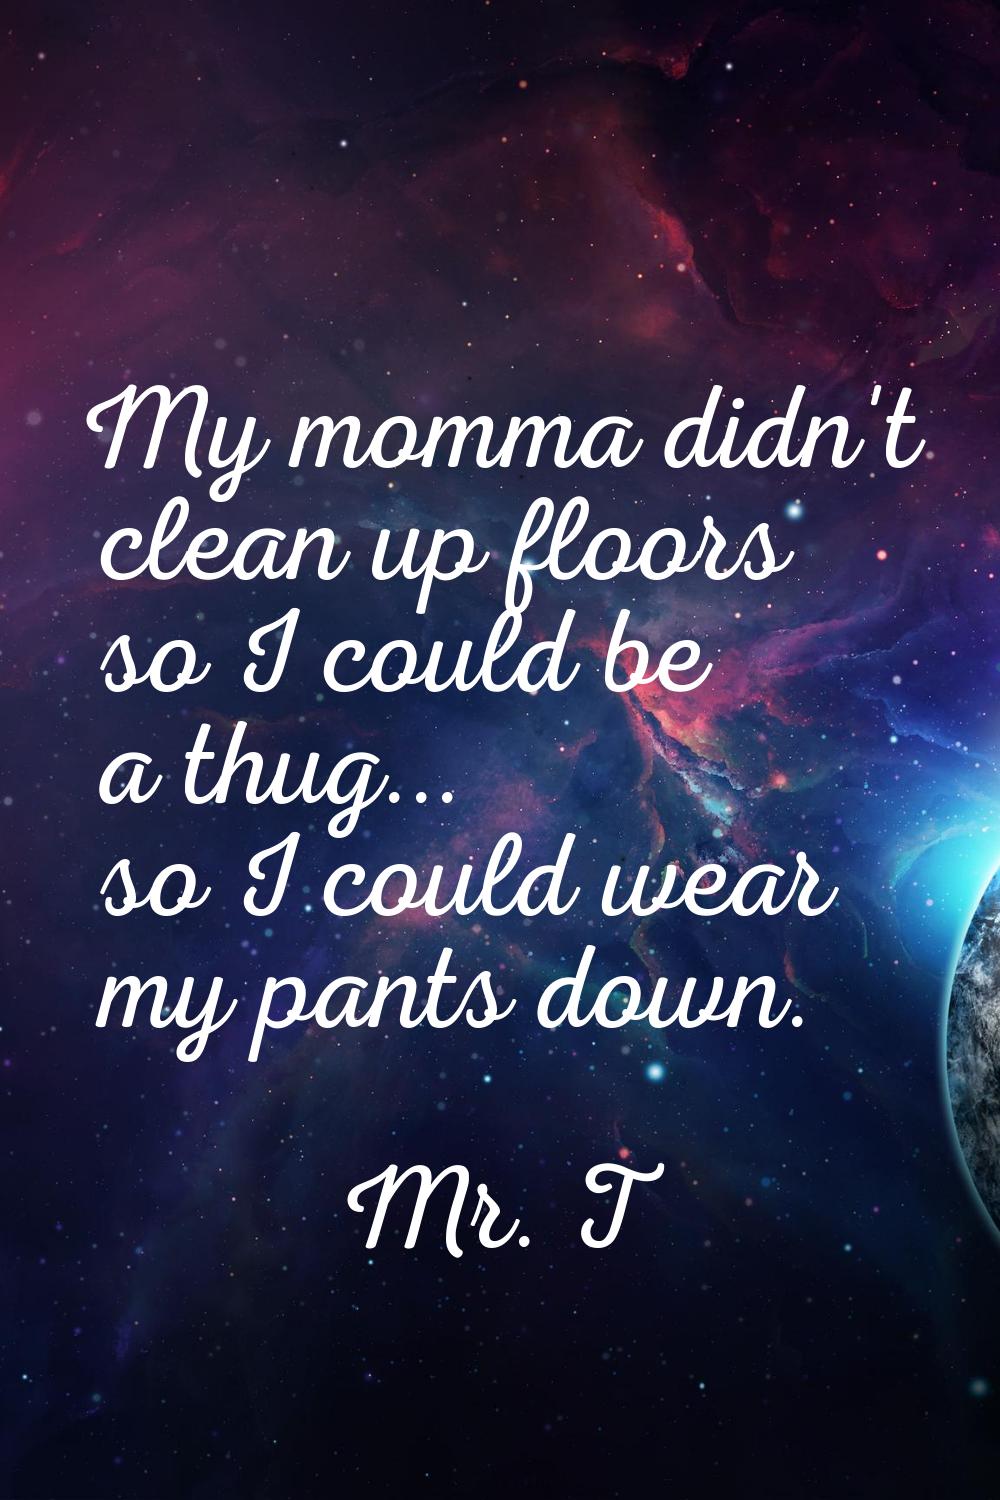 My momma didn't clean up floors so I could be a thug... so I could wear my pants down.